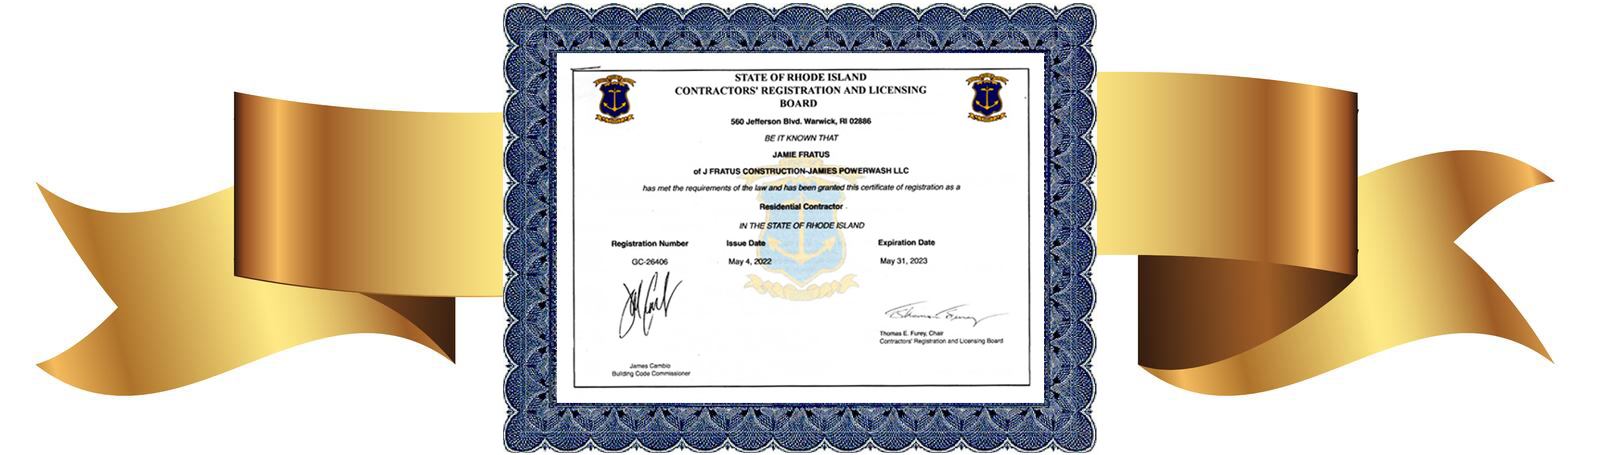 Contractor's License and Certificate